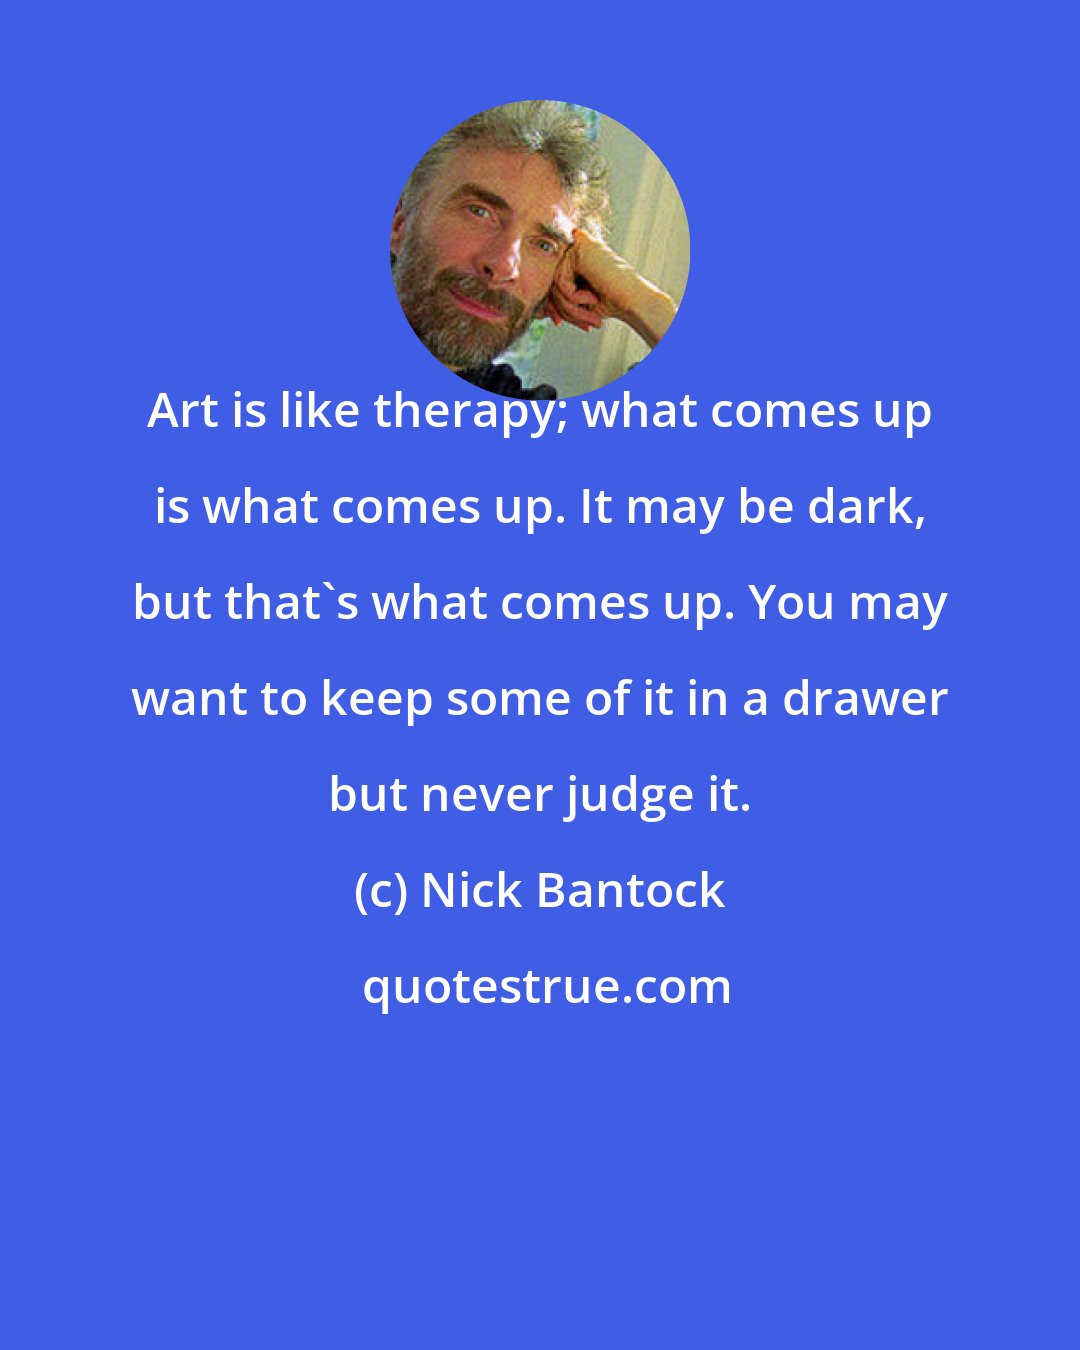 Nick Bantock: Art is like therapy; what comes up is what comes up. It may be dark, but that's what comes up. You may want to keep some of it in a drawer but never judge it.